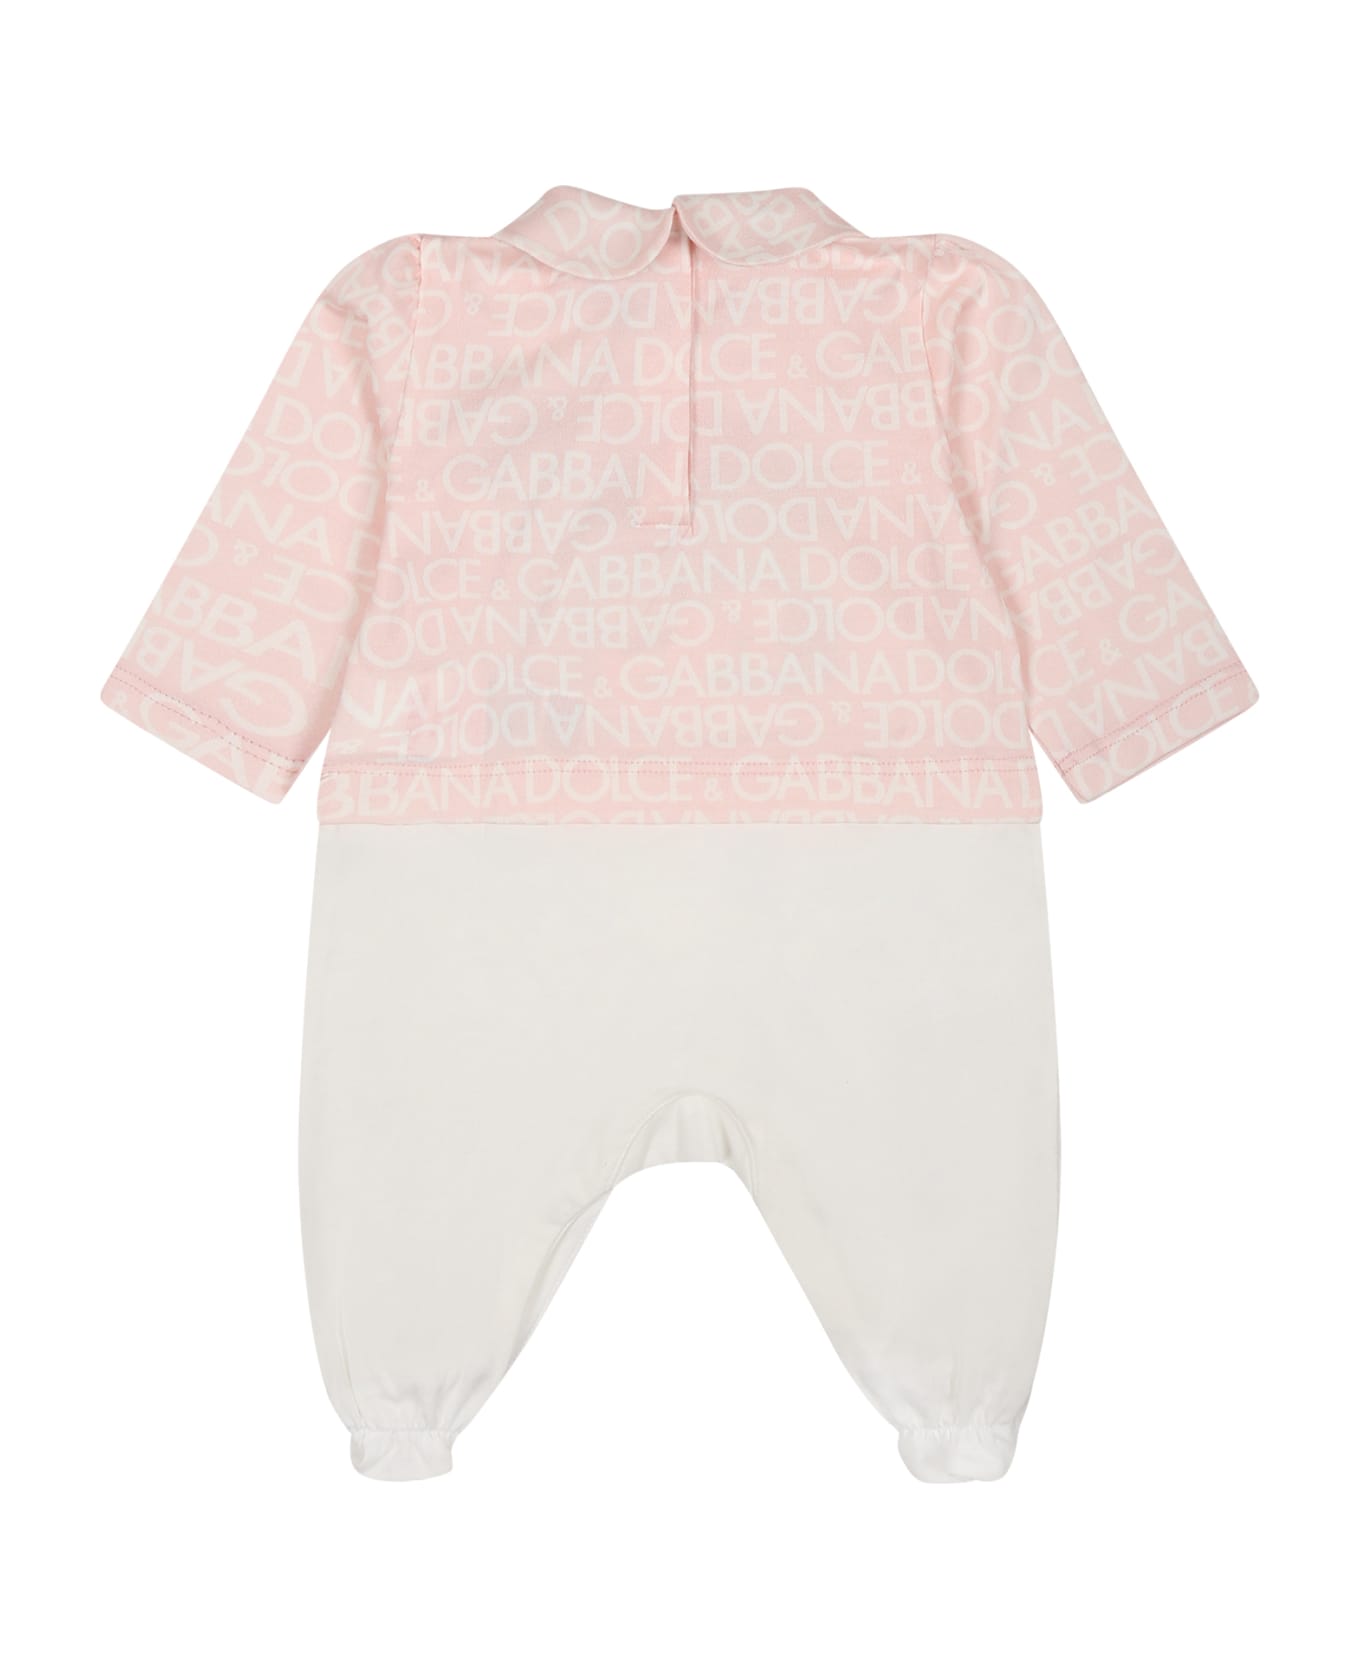 Dolce & Gabbana Pink Set For Baby Girl With Logo And Leoaprds - Pink ボディスーツ＆セットアップ